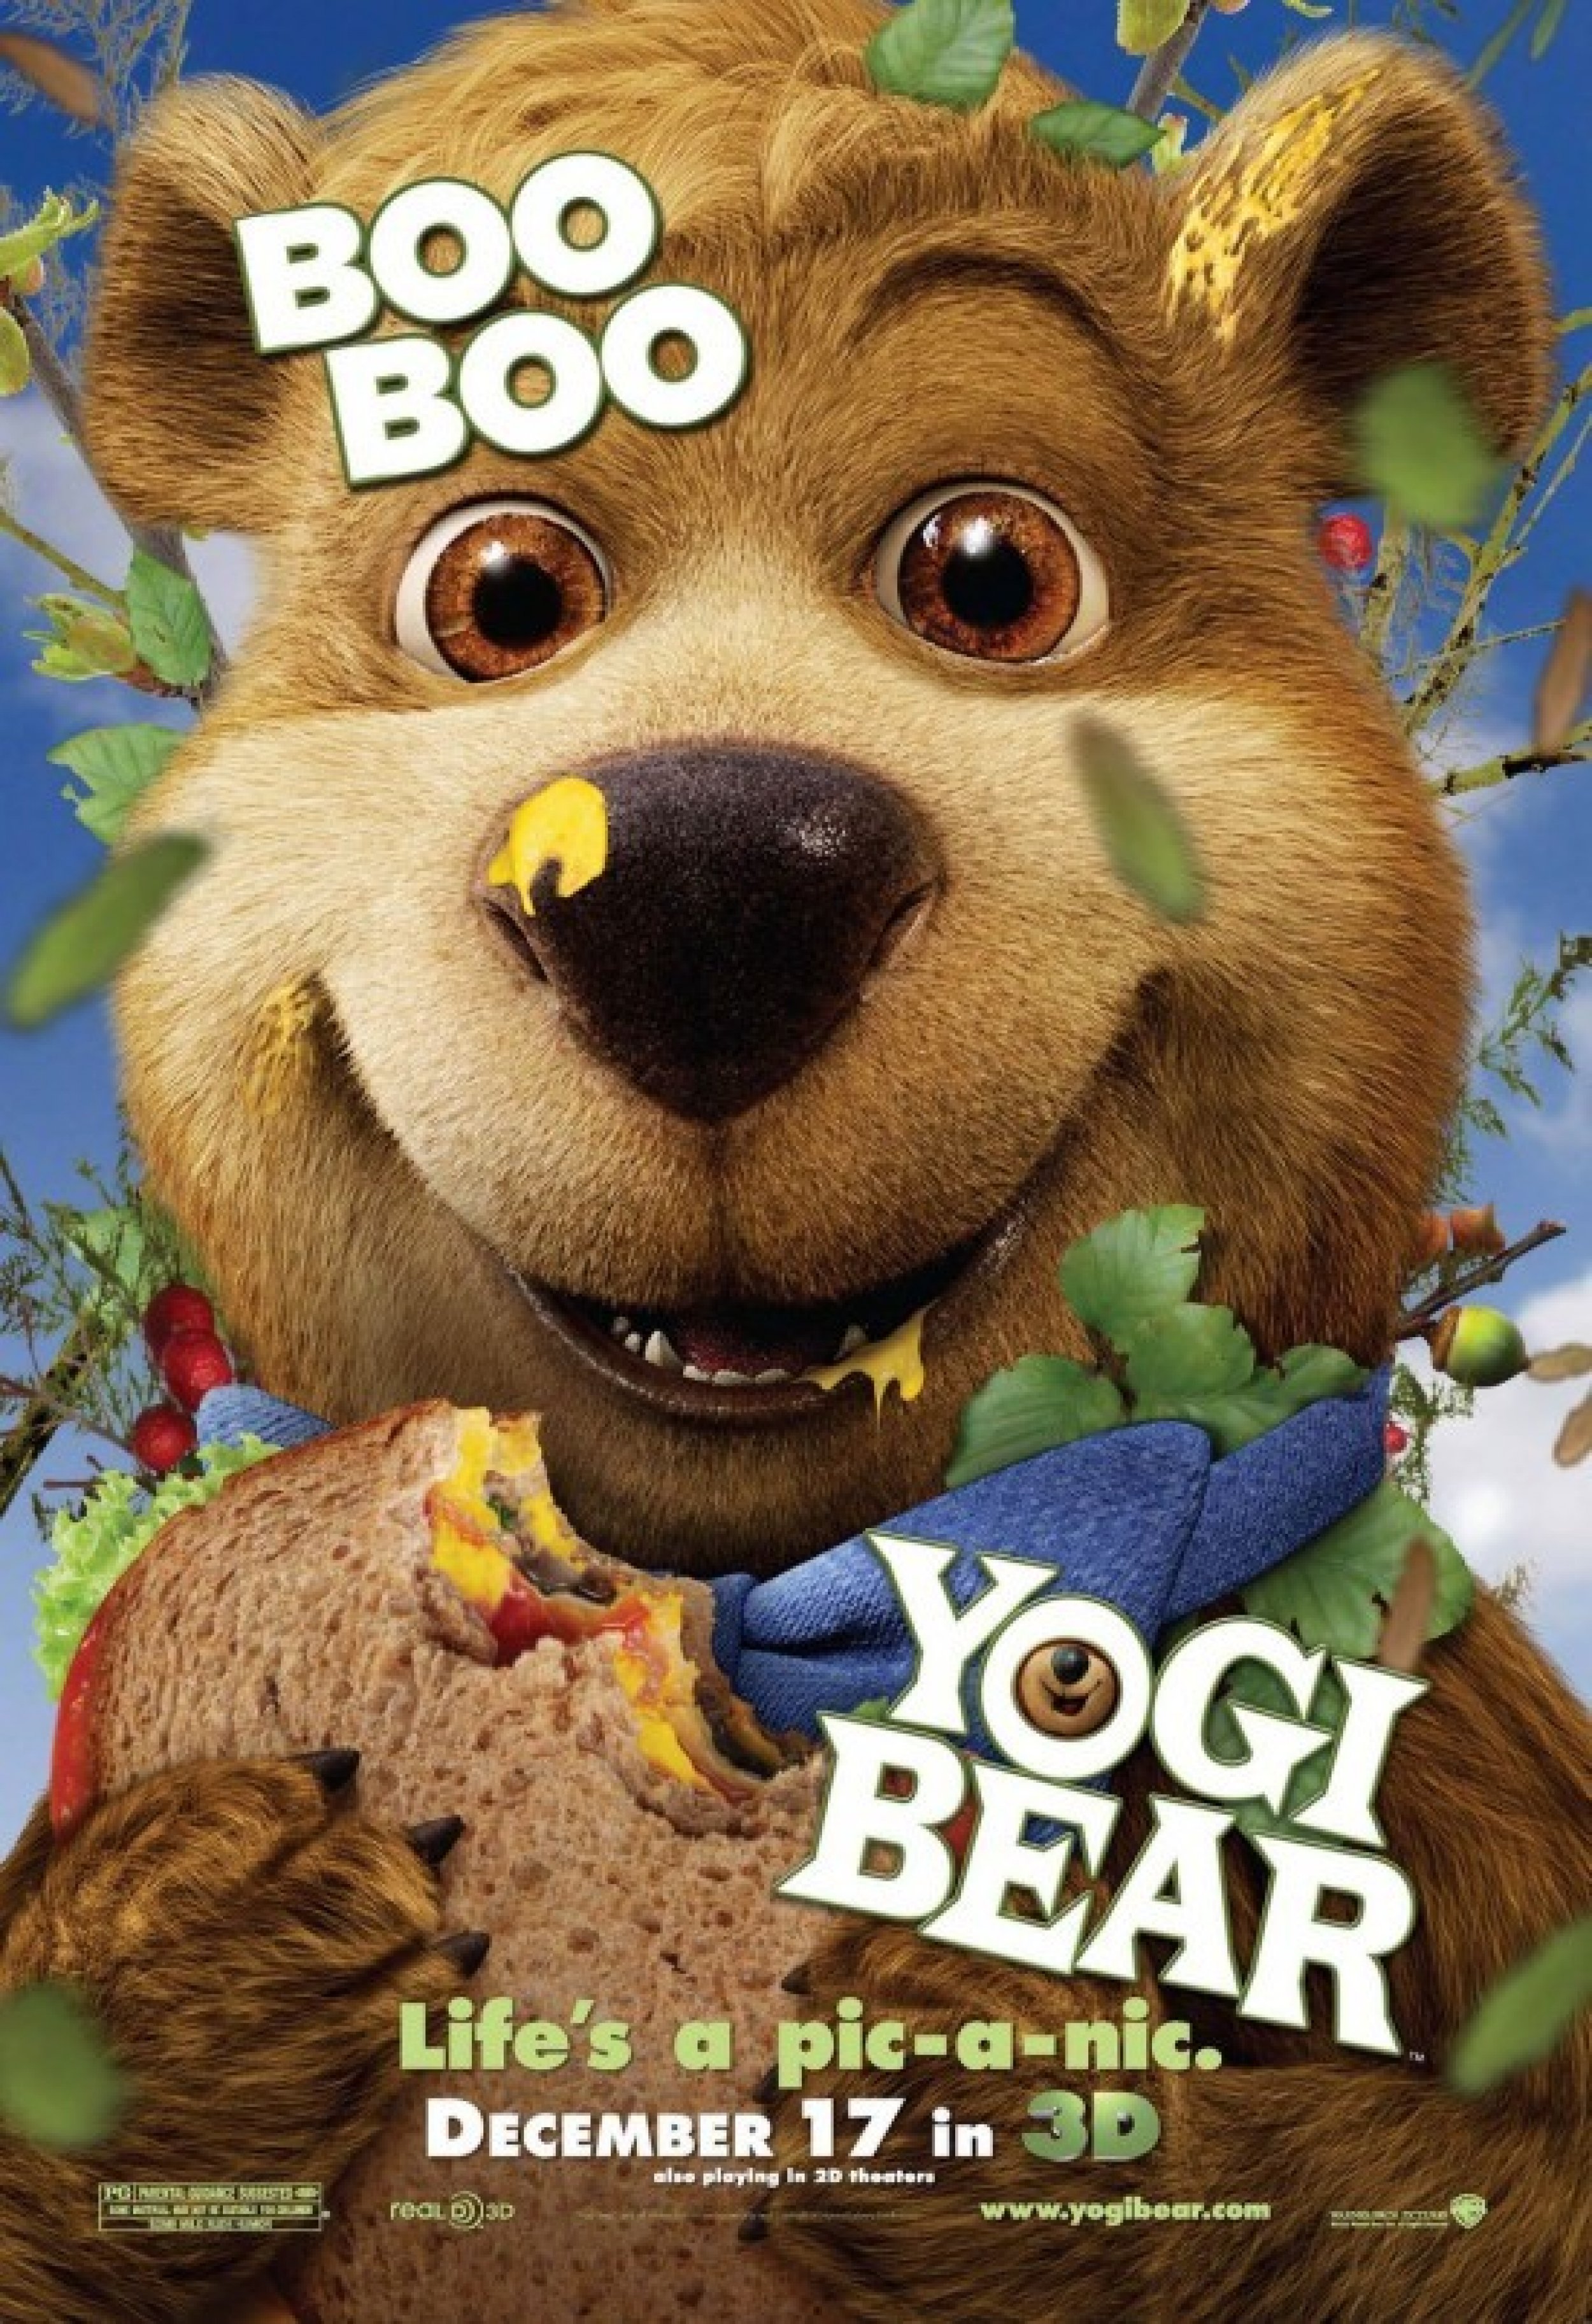 As the voice of Boo Boo in the 3D Yogi Bear movie.